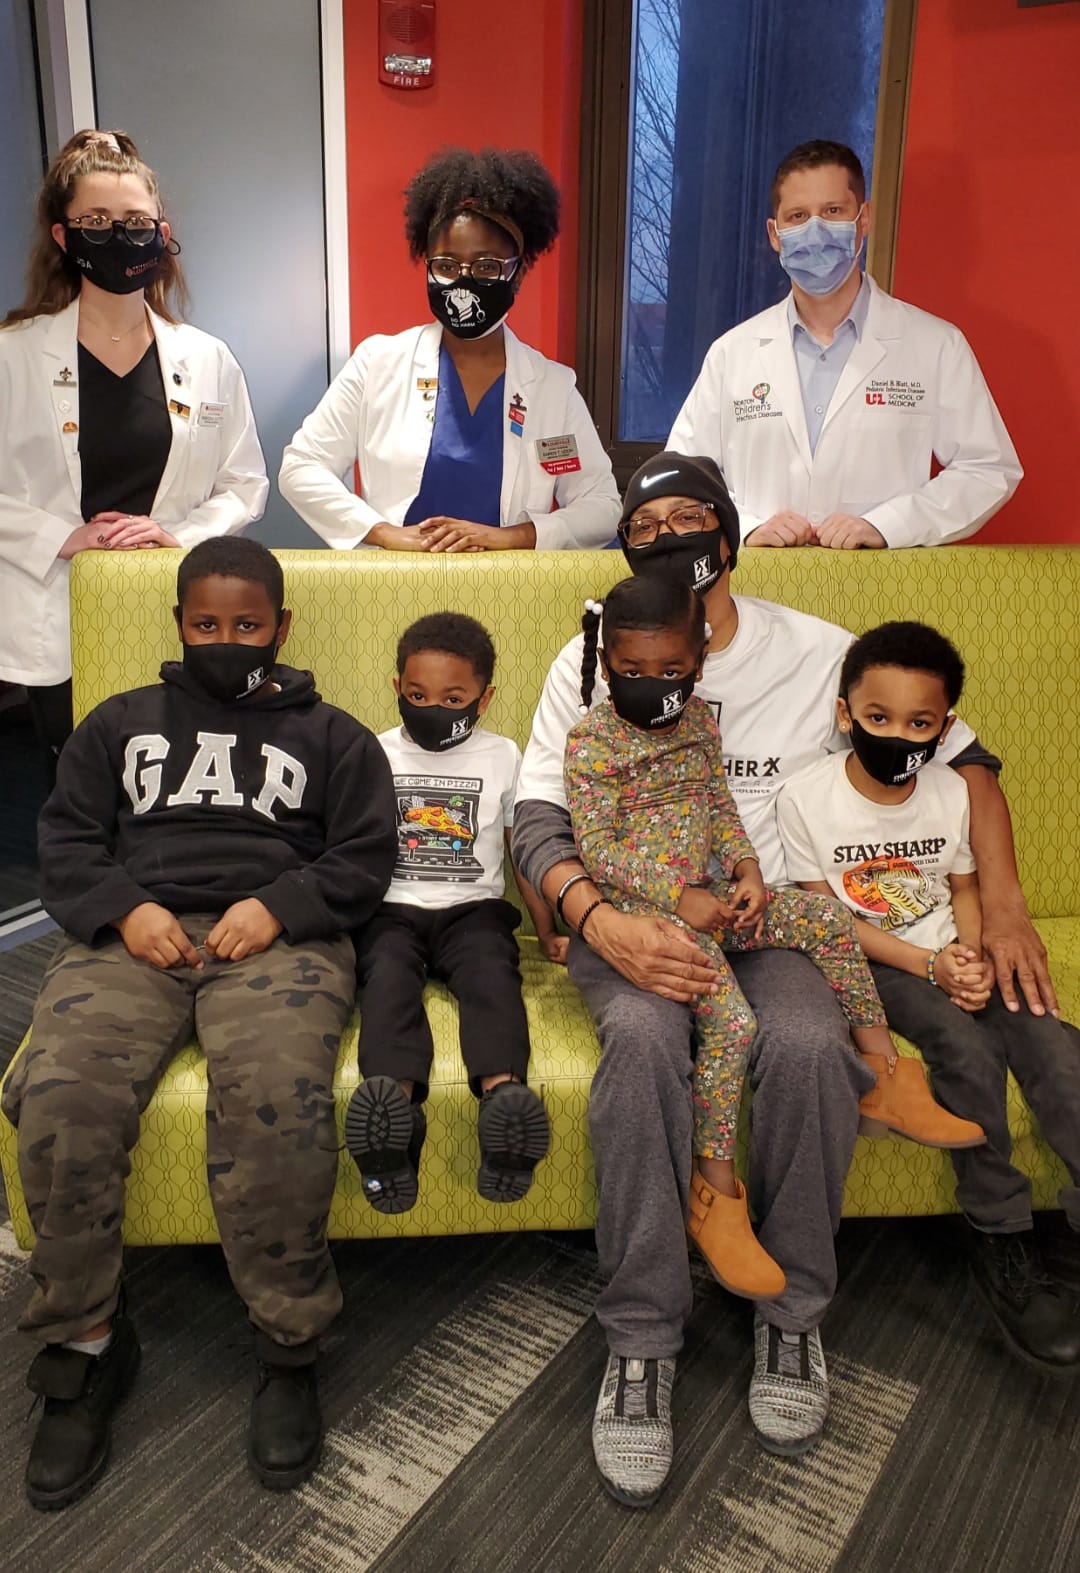 UofL’s School of Medicine has joined a handful of other organizations to ensure all children have access to a face mask to help protect them from COVID-19.